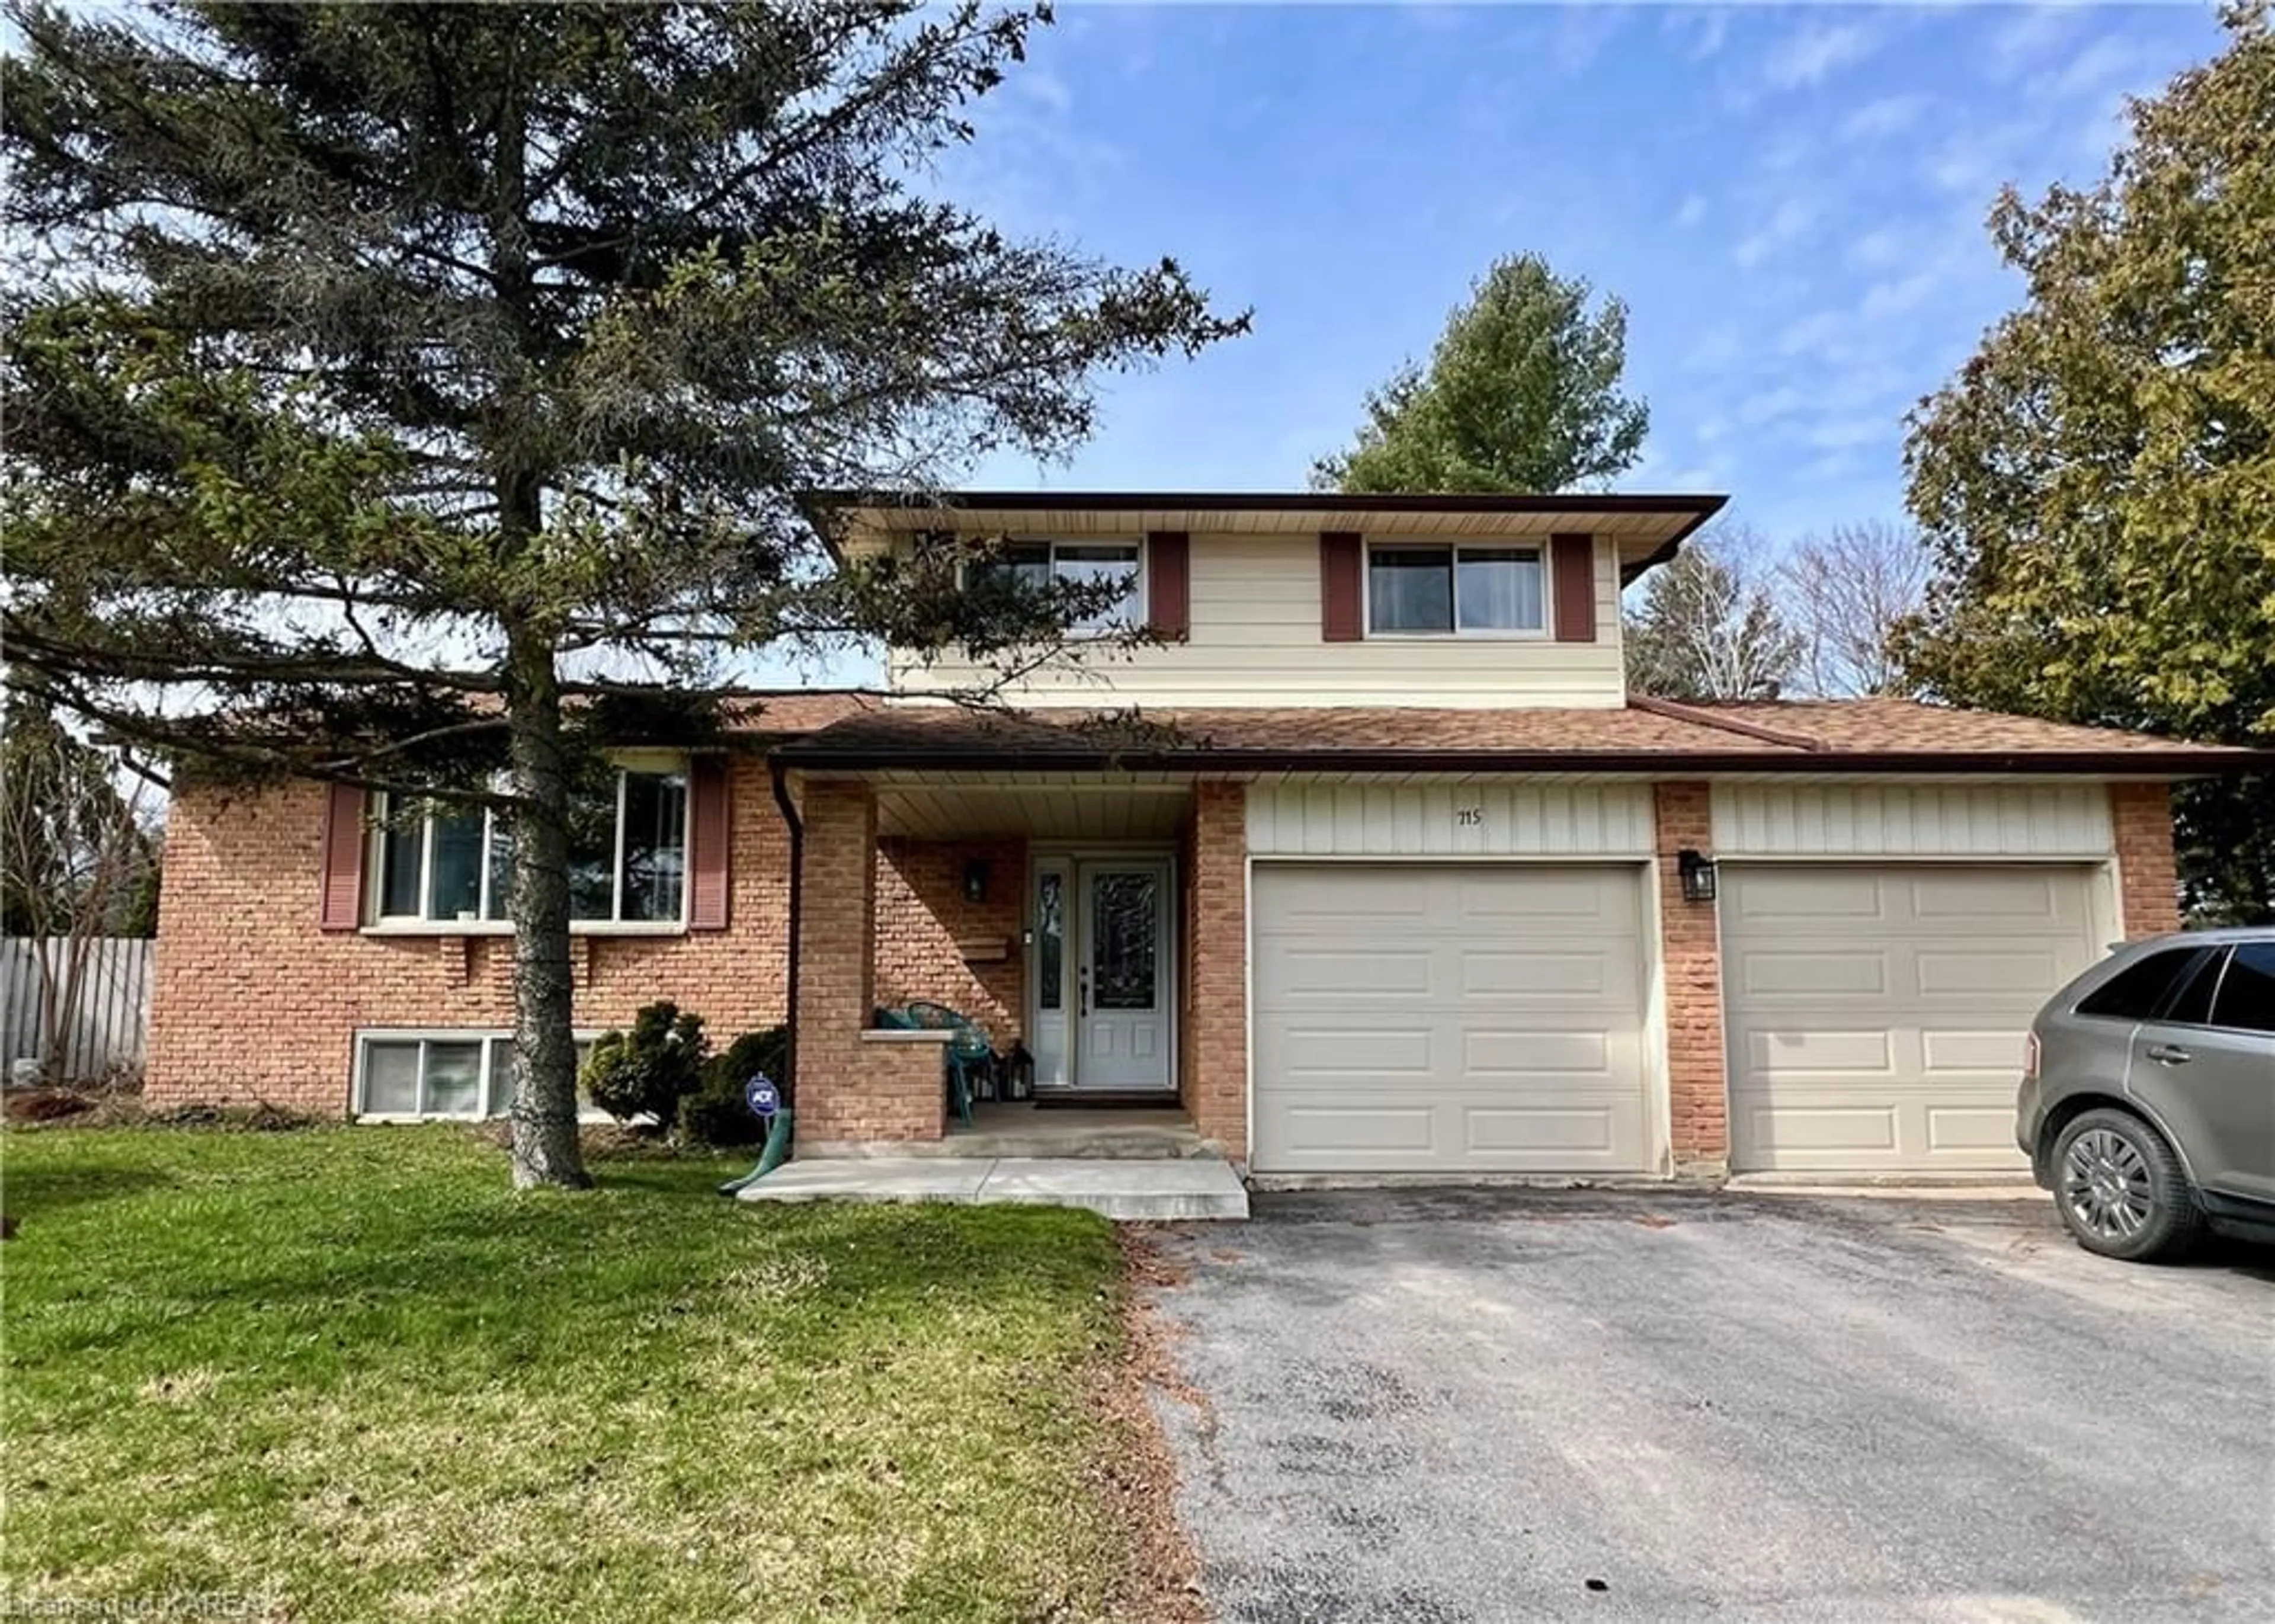 Home with brick exterior material for 715 Collins Bay Rd, Kingston Ontario K7M 5H1